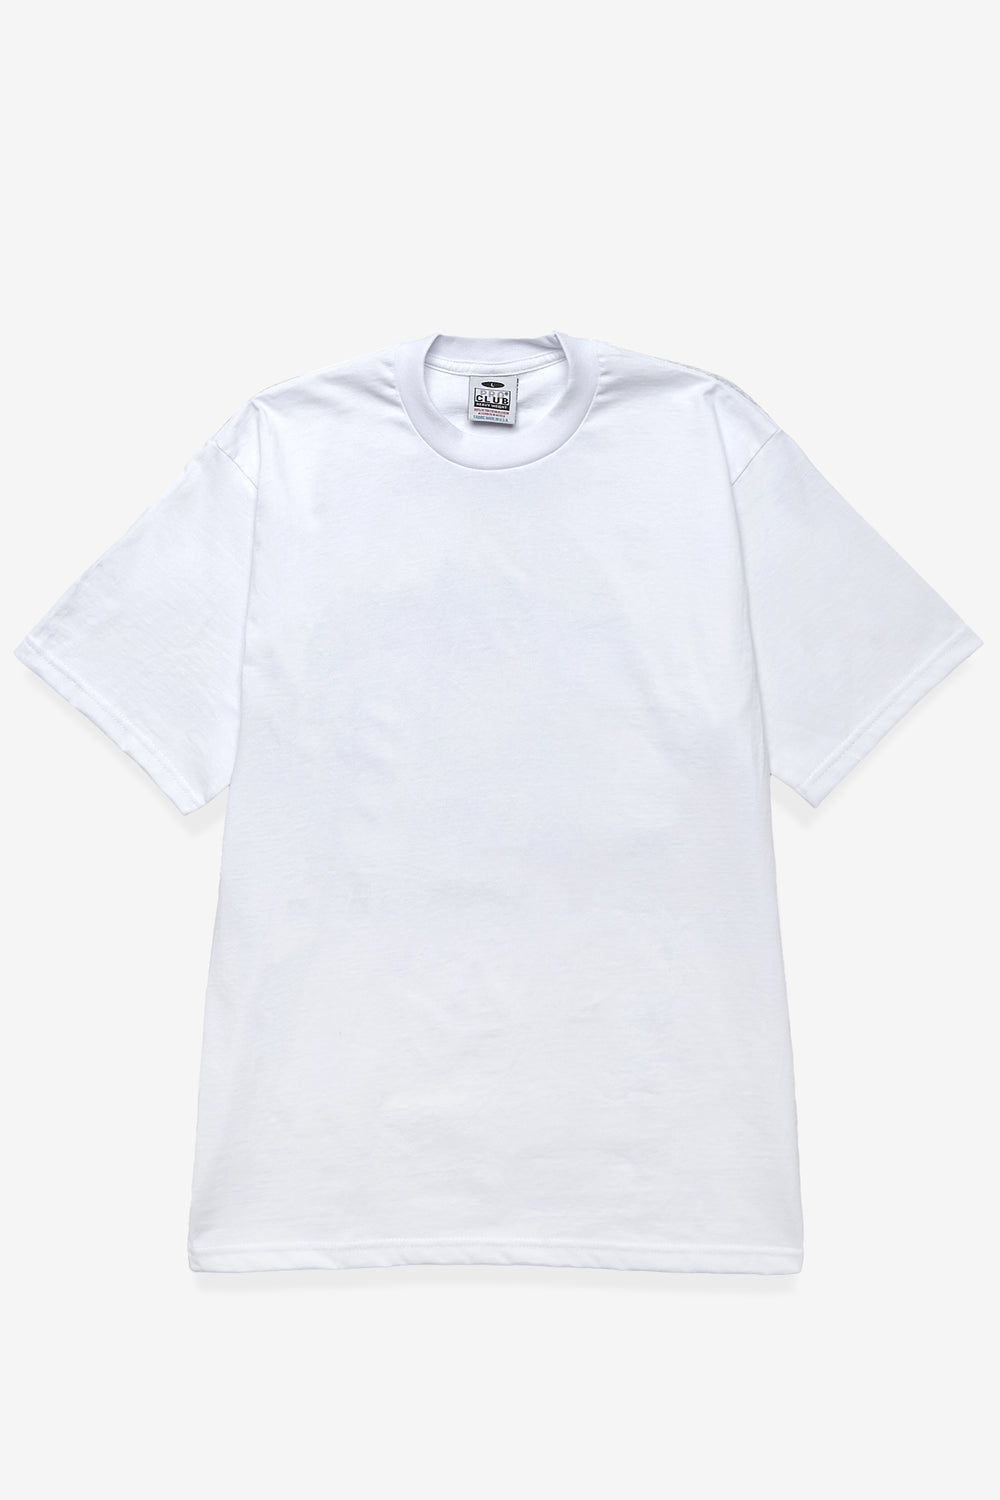 HEIGHTS TEES — PRO-CLUB Blank T-shirts LOWEST PRICE!